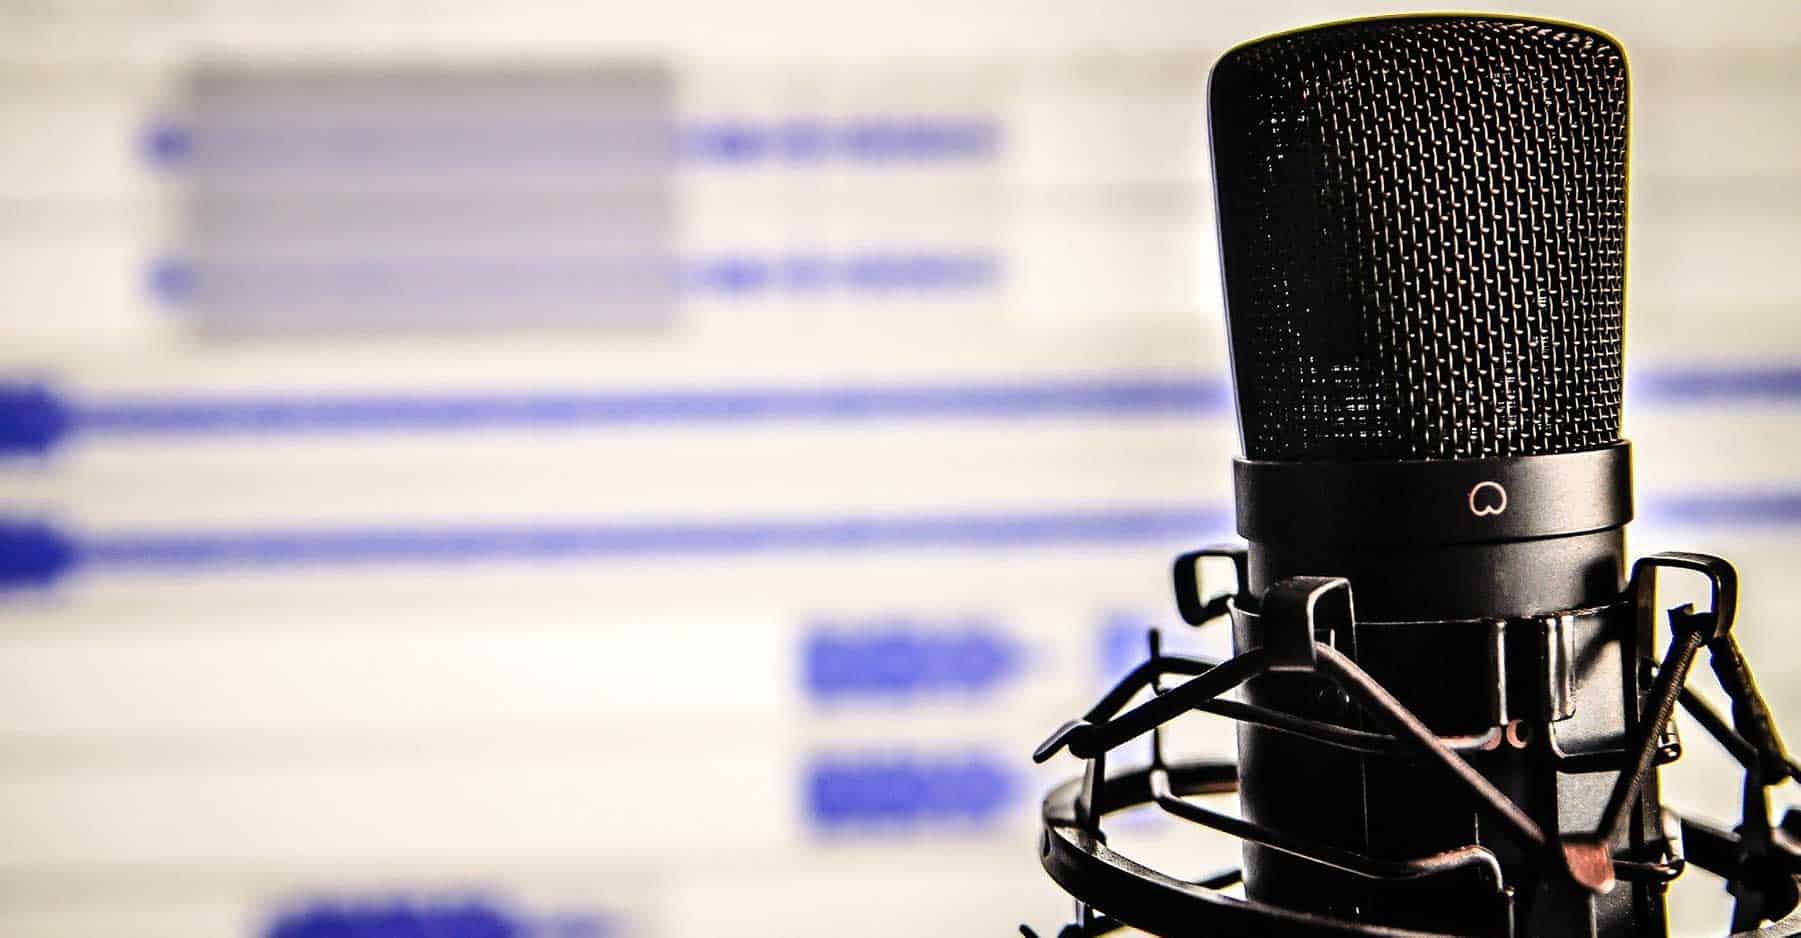 Get Paid to Advertise Podcasting